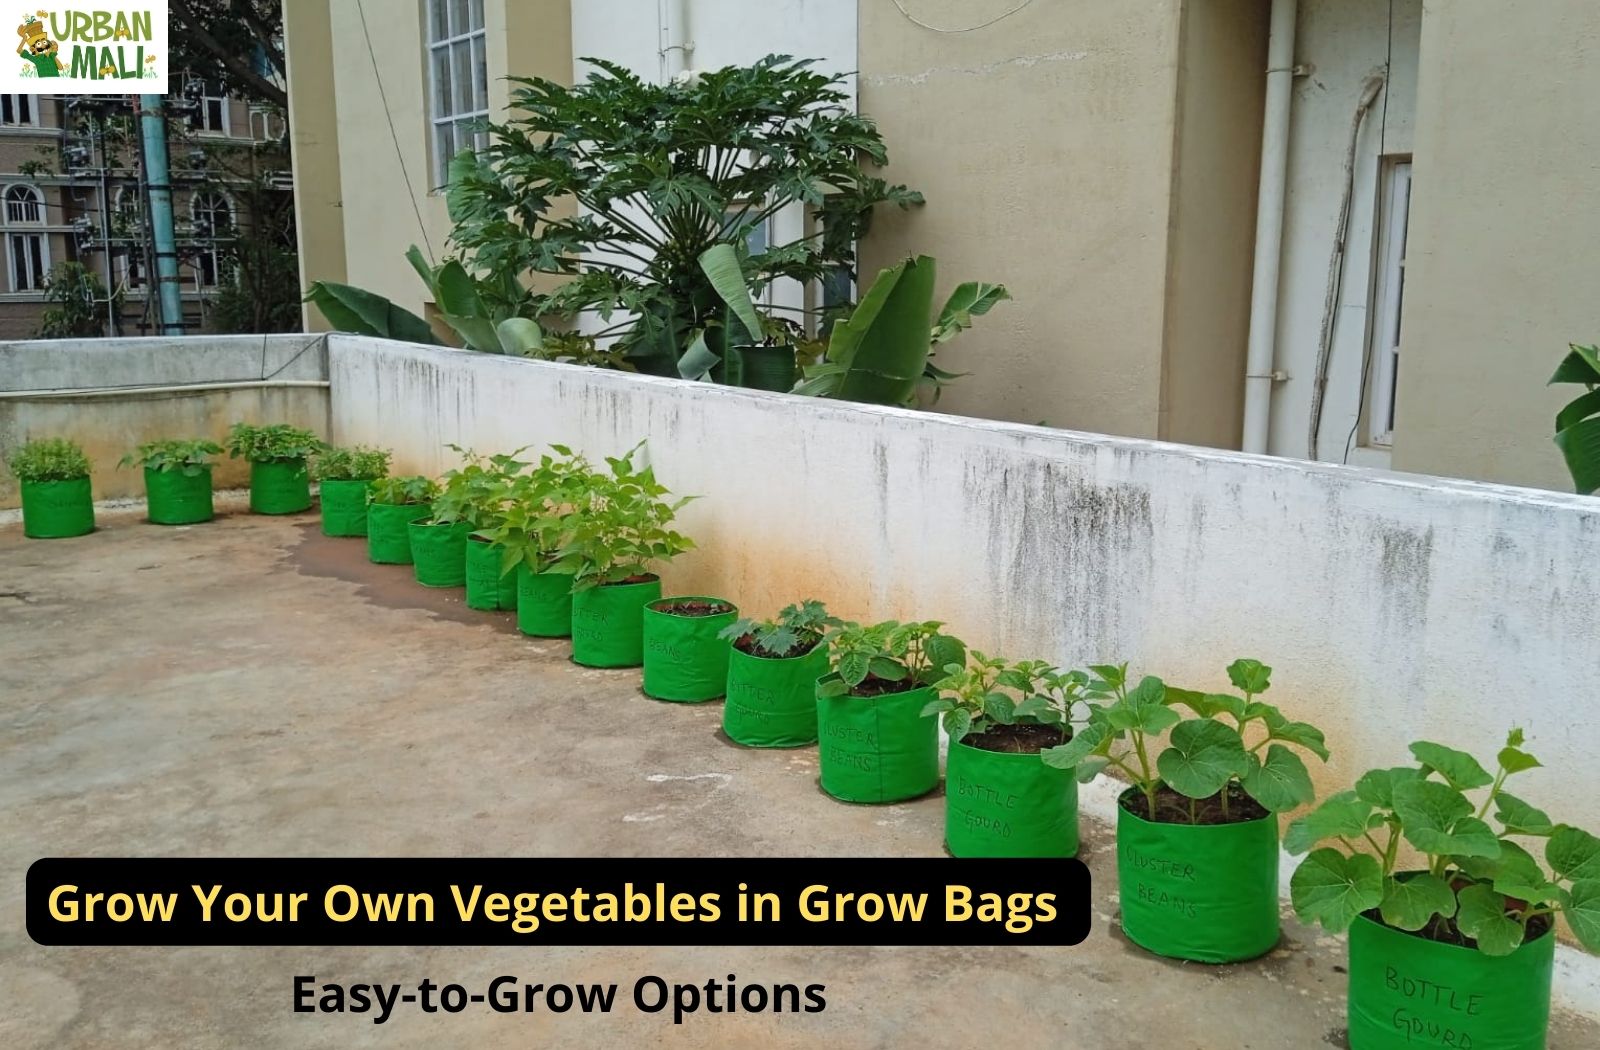 Grow Your Own Vegetable in Grow Bags: Easy-to-Grow Option